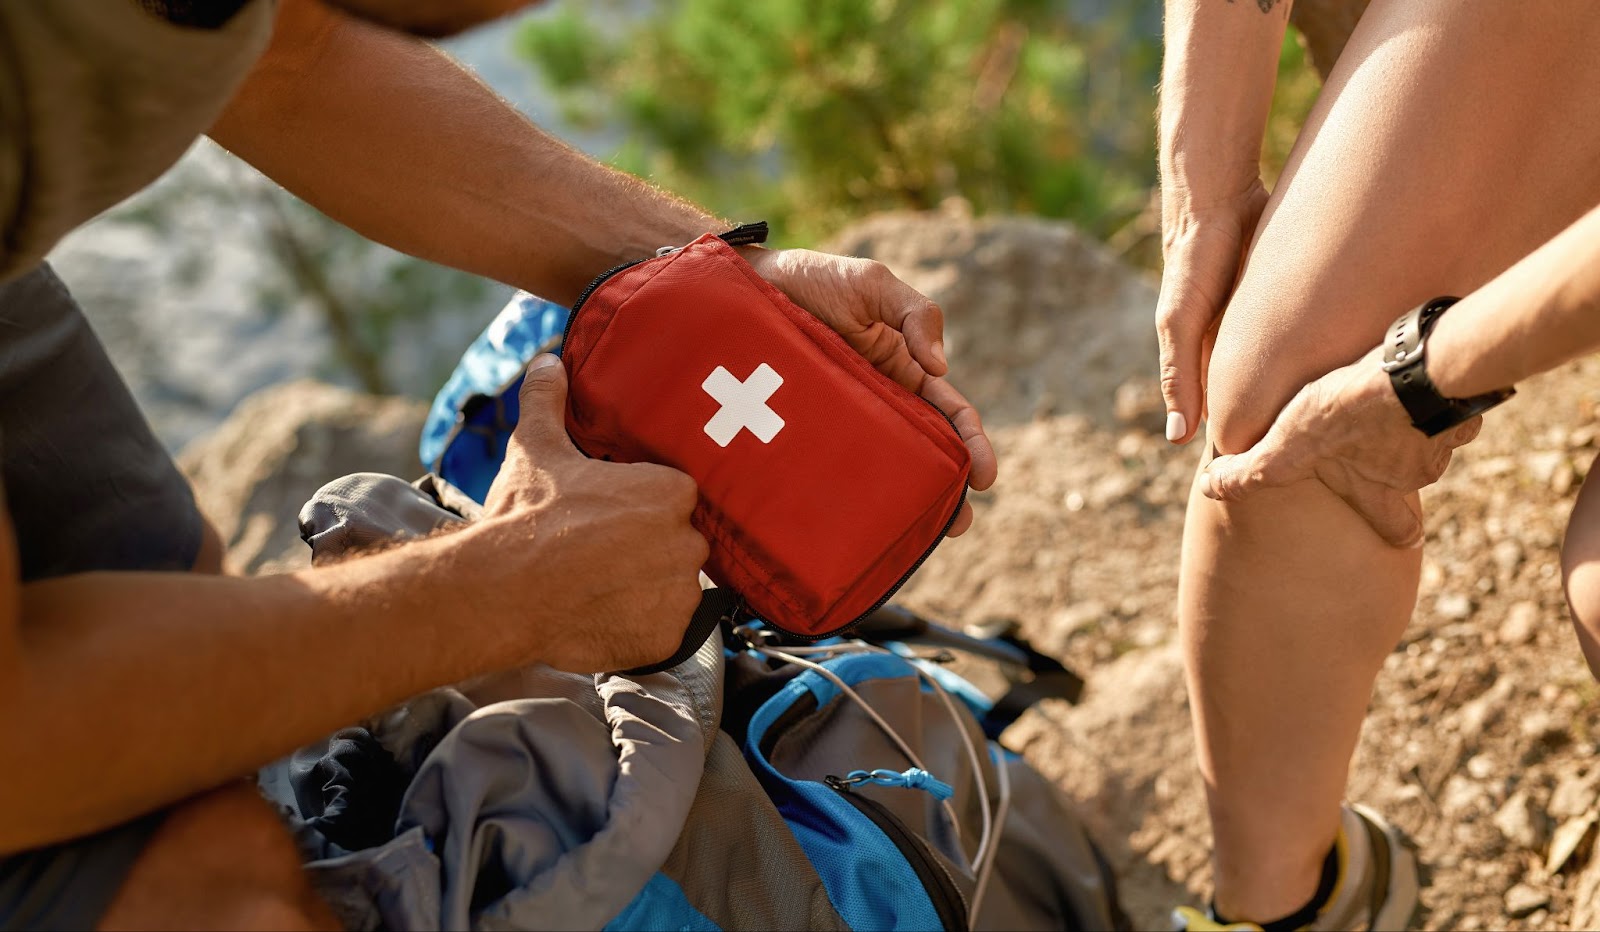 Emergency kit being applied to a leg in Mexico during a hunting expedition with guides